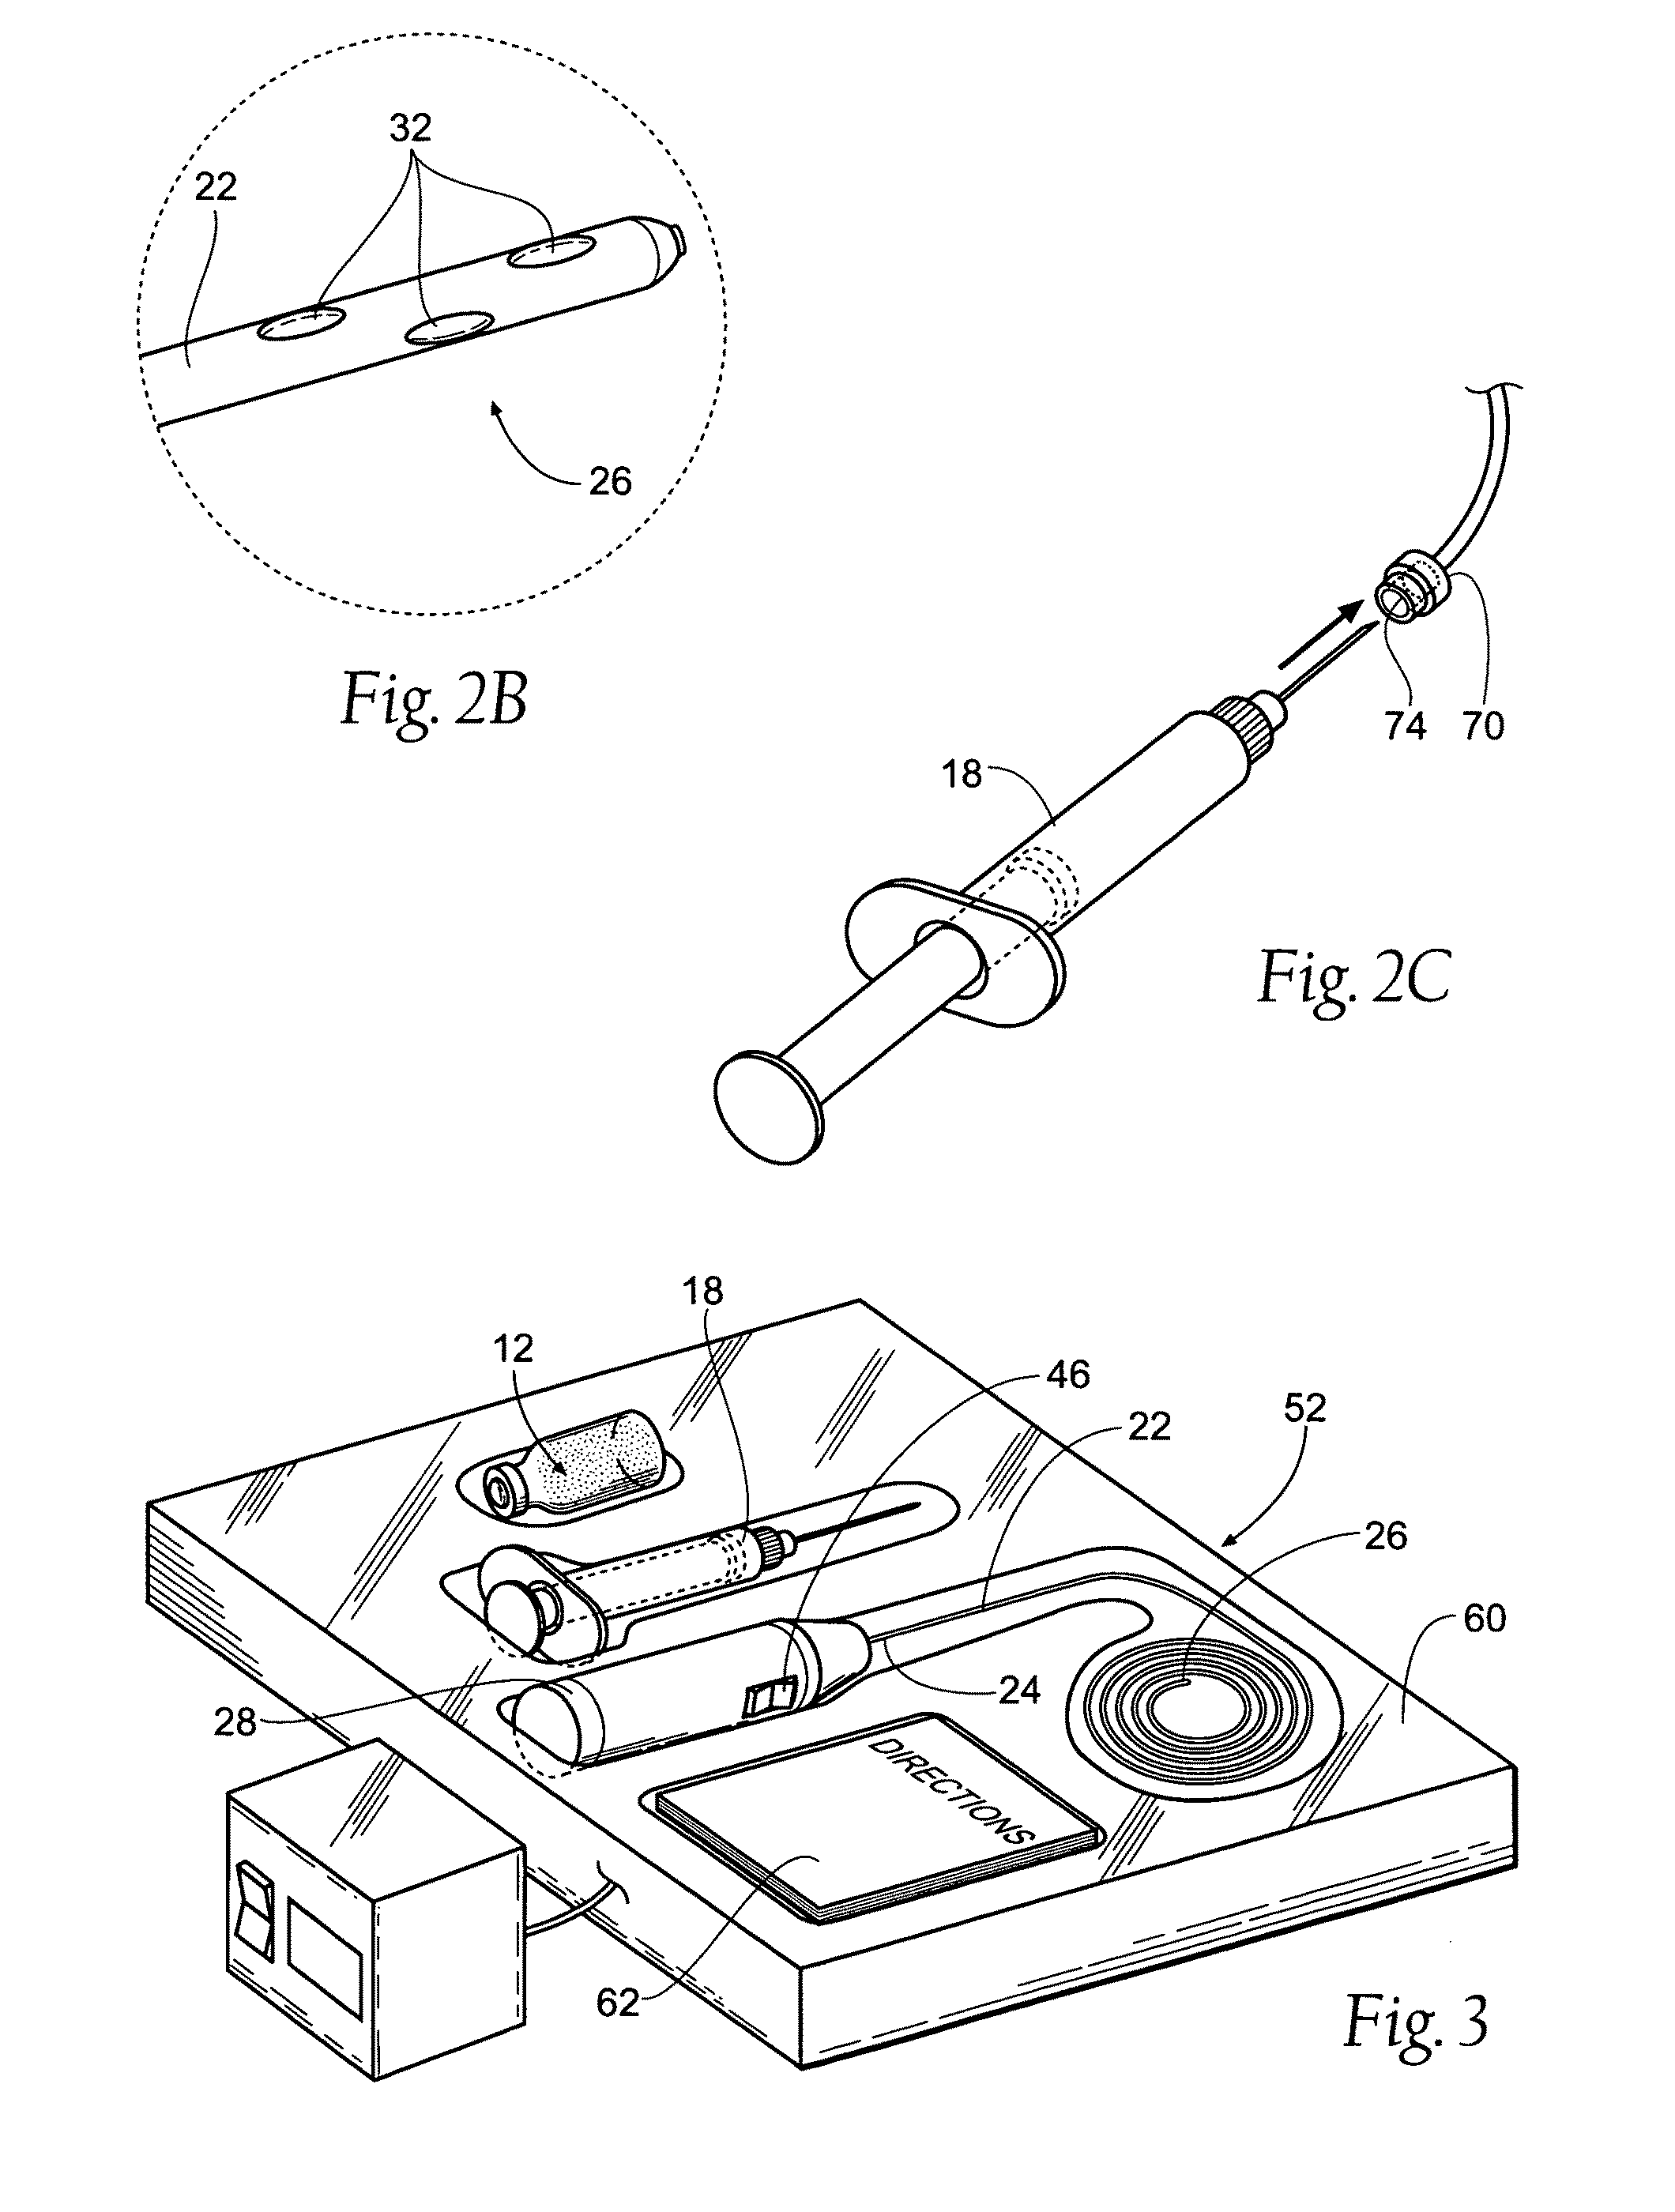 Systems and methods for treating superficial venous malformations like varicose or spider veins